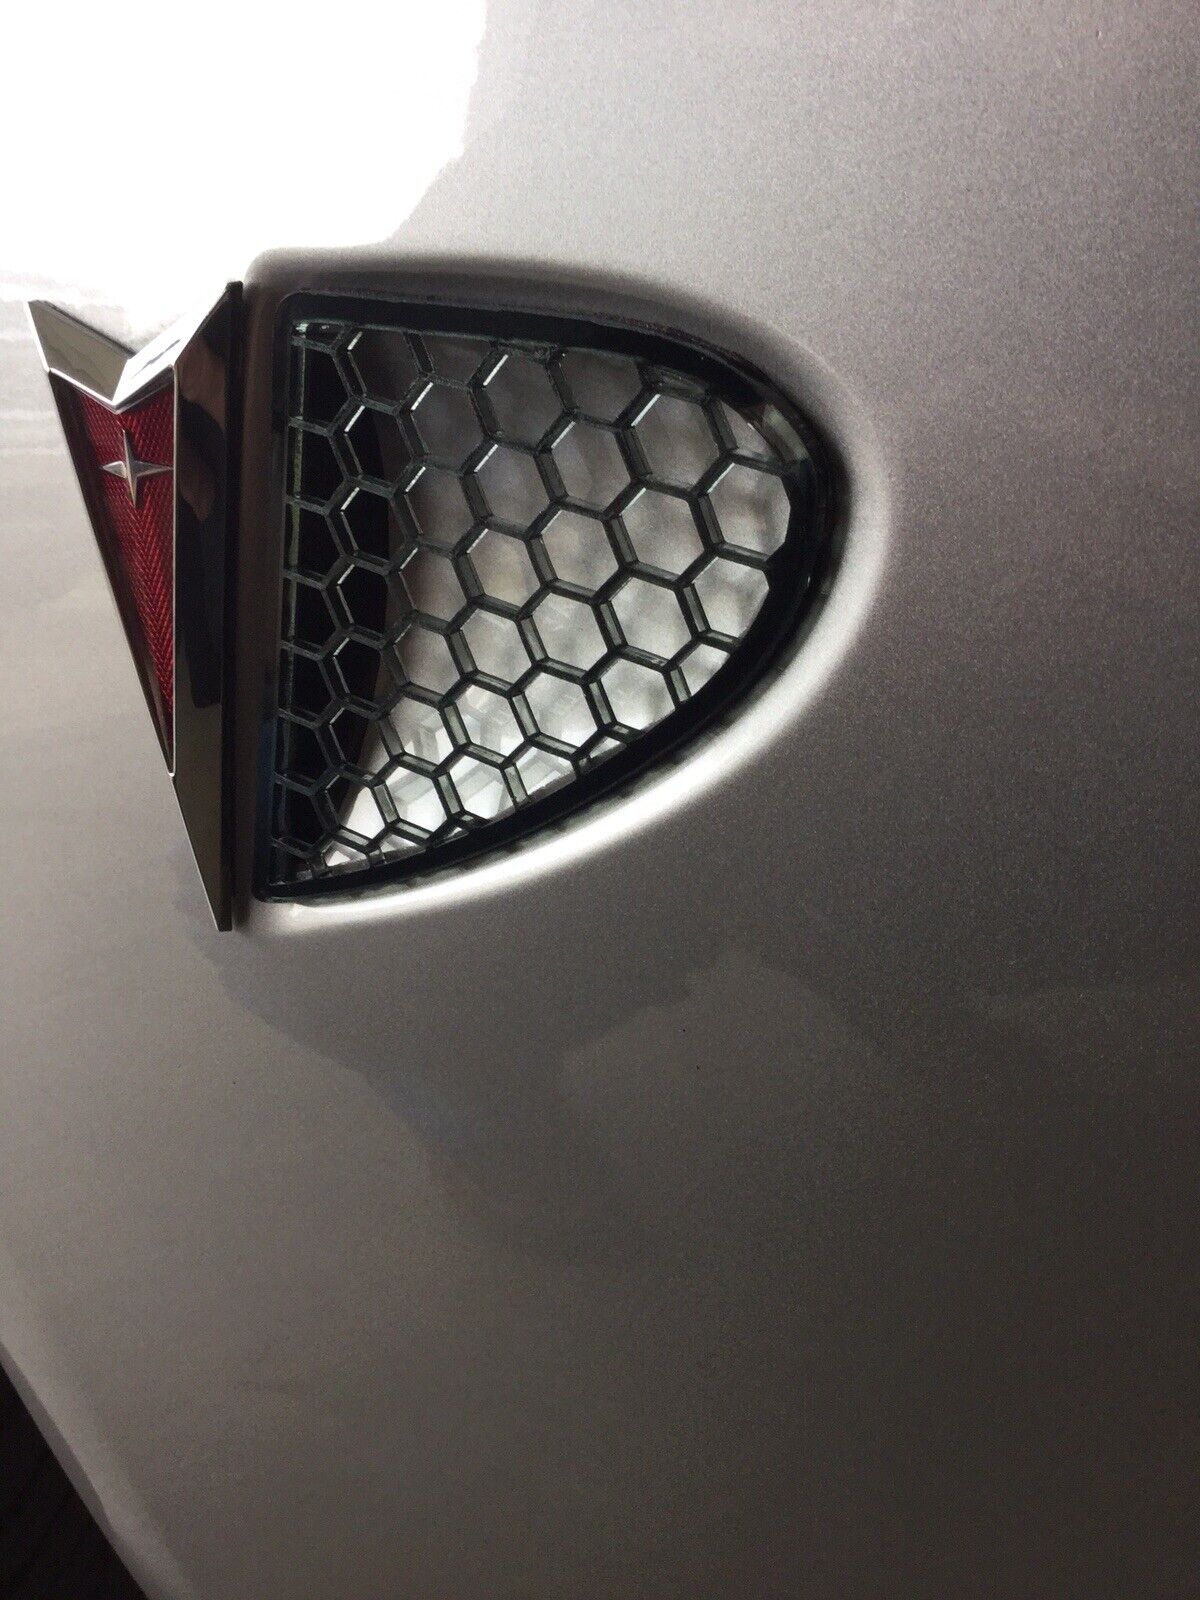 🇺🇸Pontiac Solstice Fender Vent Covers. Proudly Made In The USA 🇺🇸🇺🇸🇺🇸